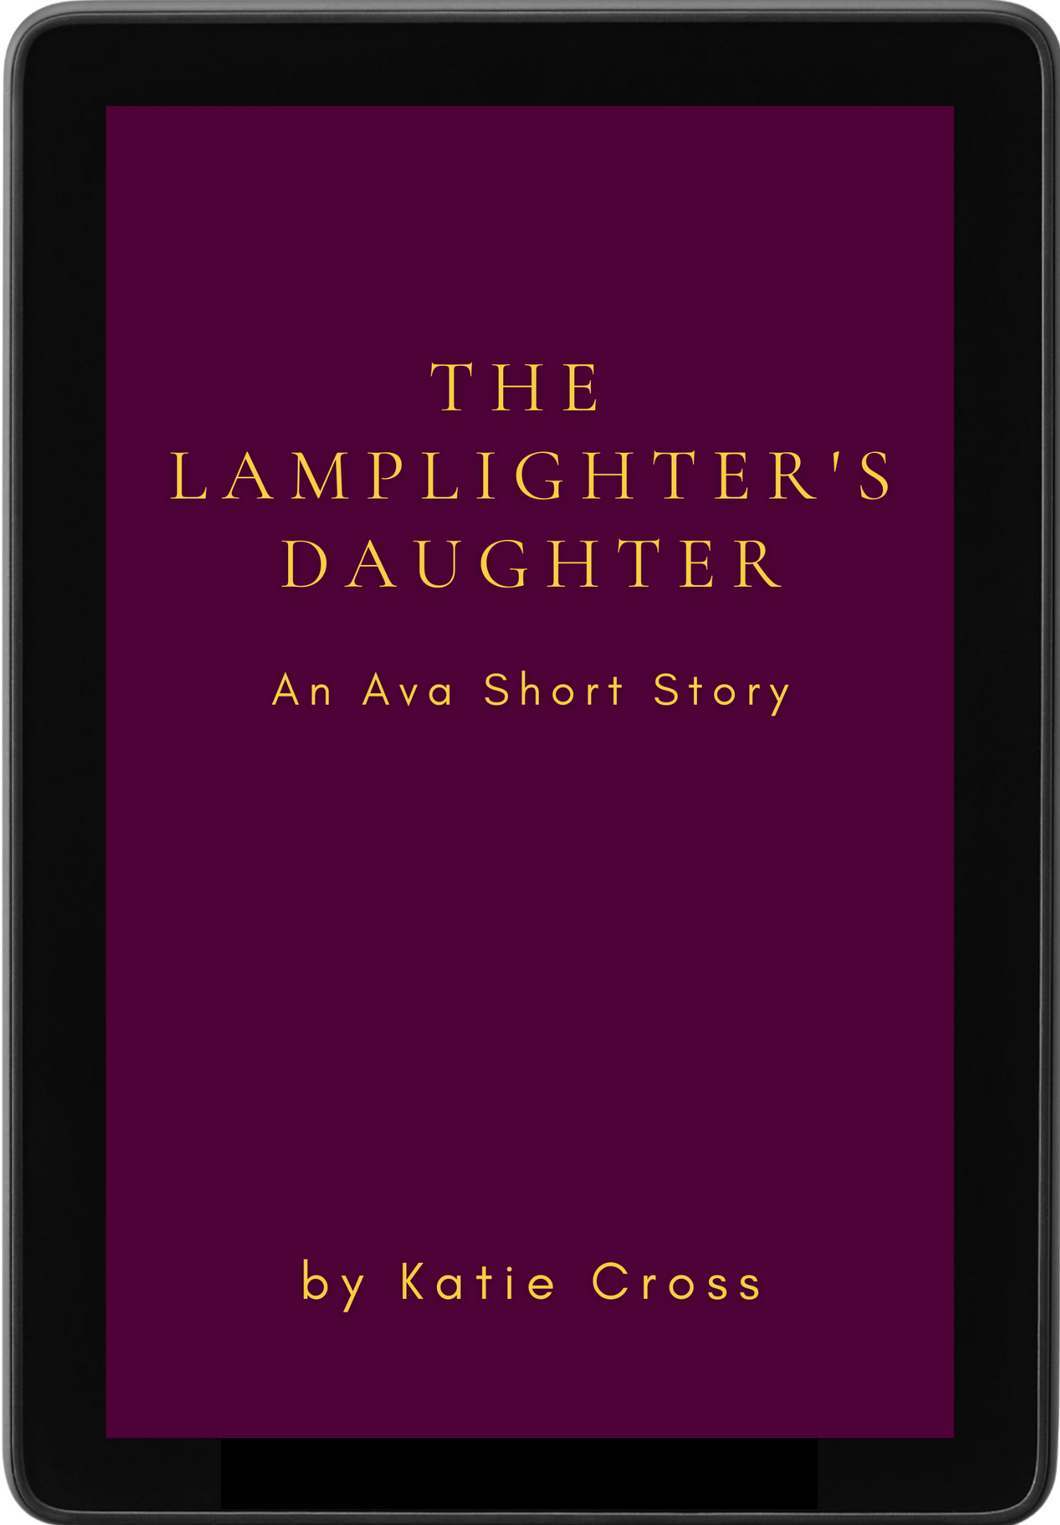 The Lamplighter's Daughter (Novella #2 in the Network Series)